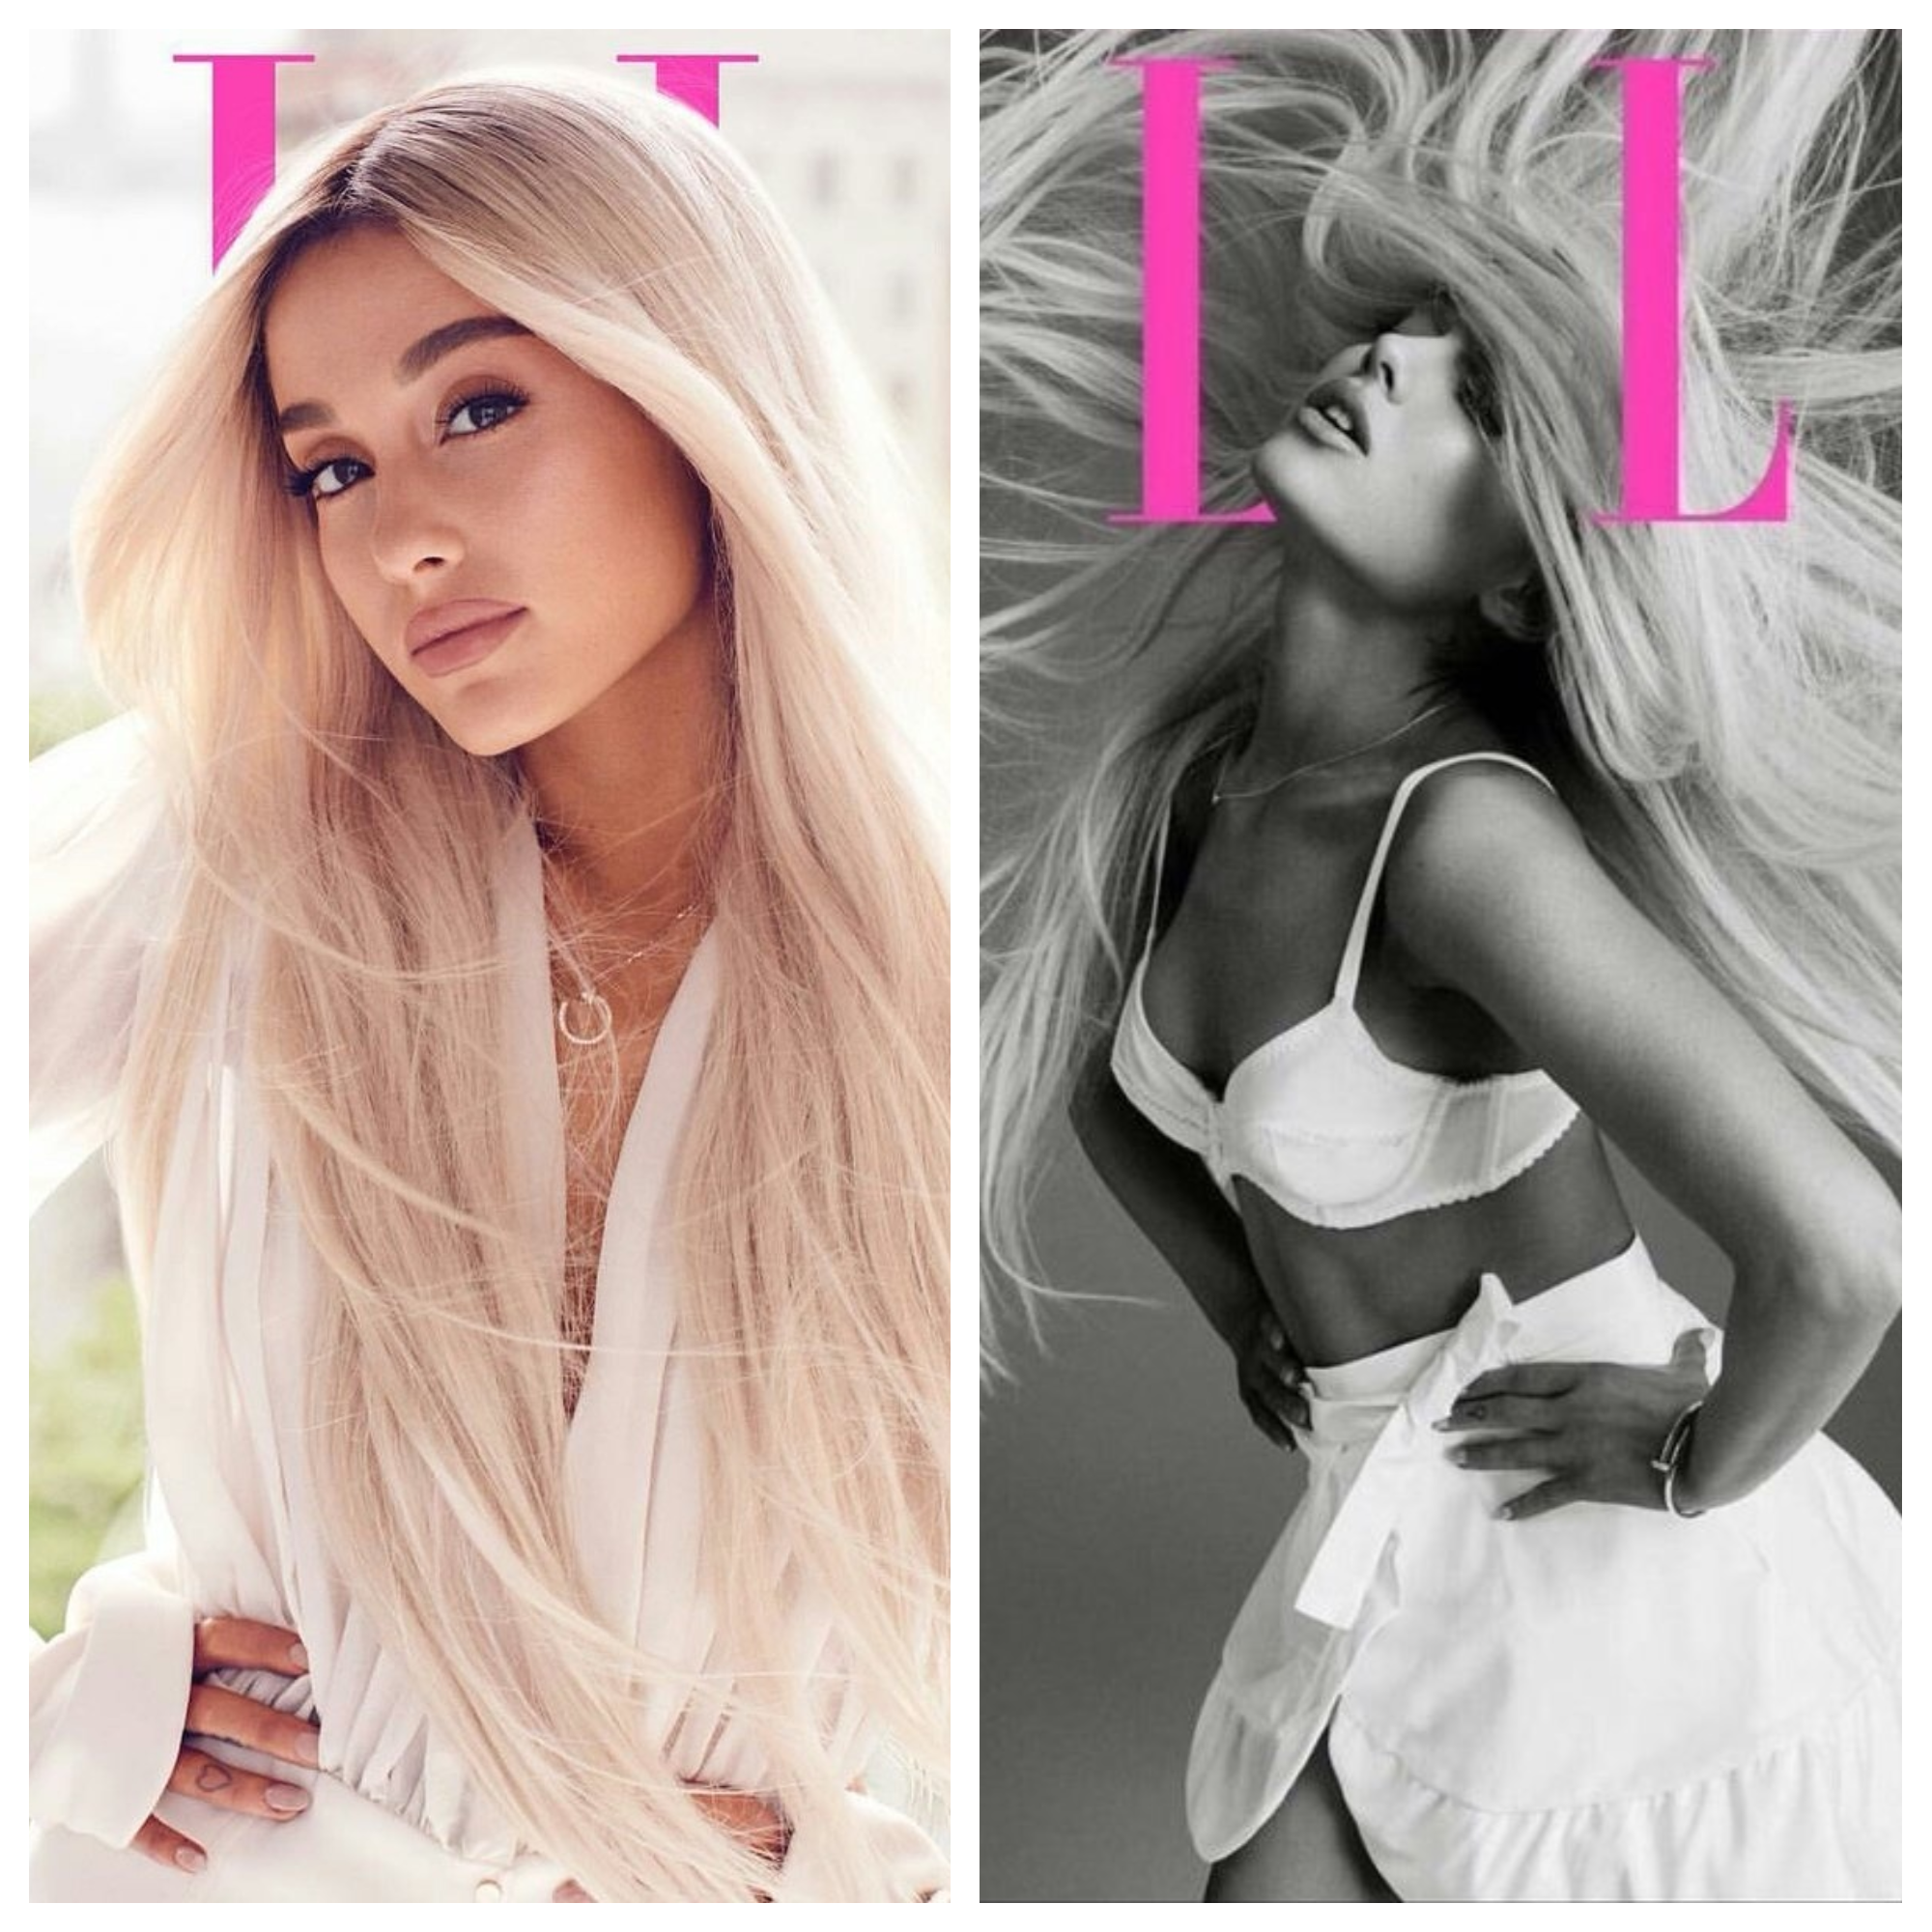 Ariana Grande Covers Elle Opens Up About Aftermath Of Manchester